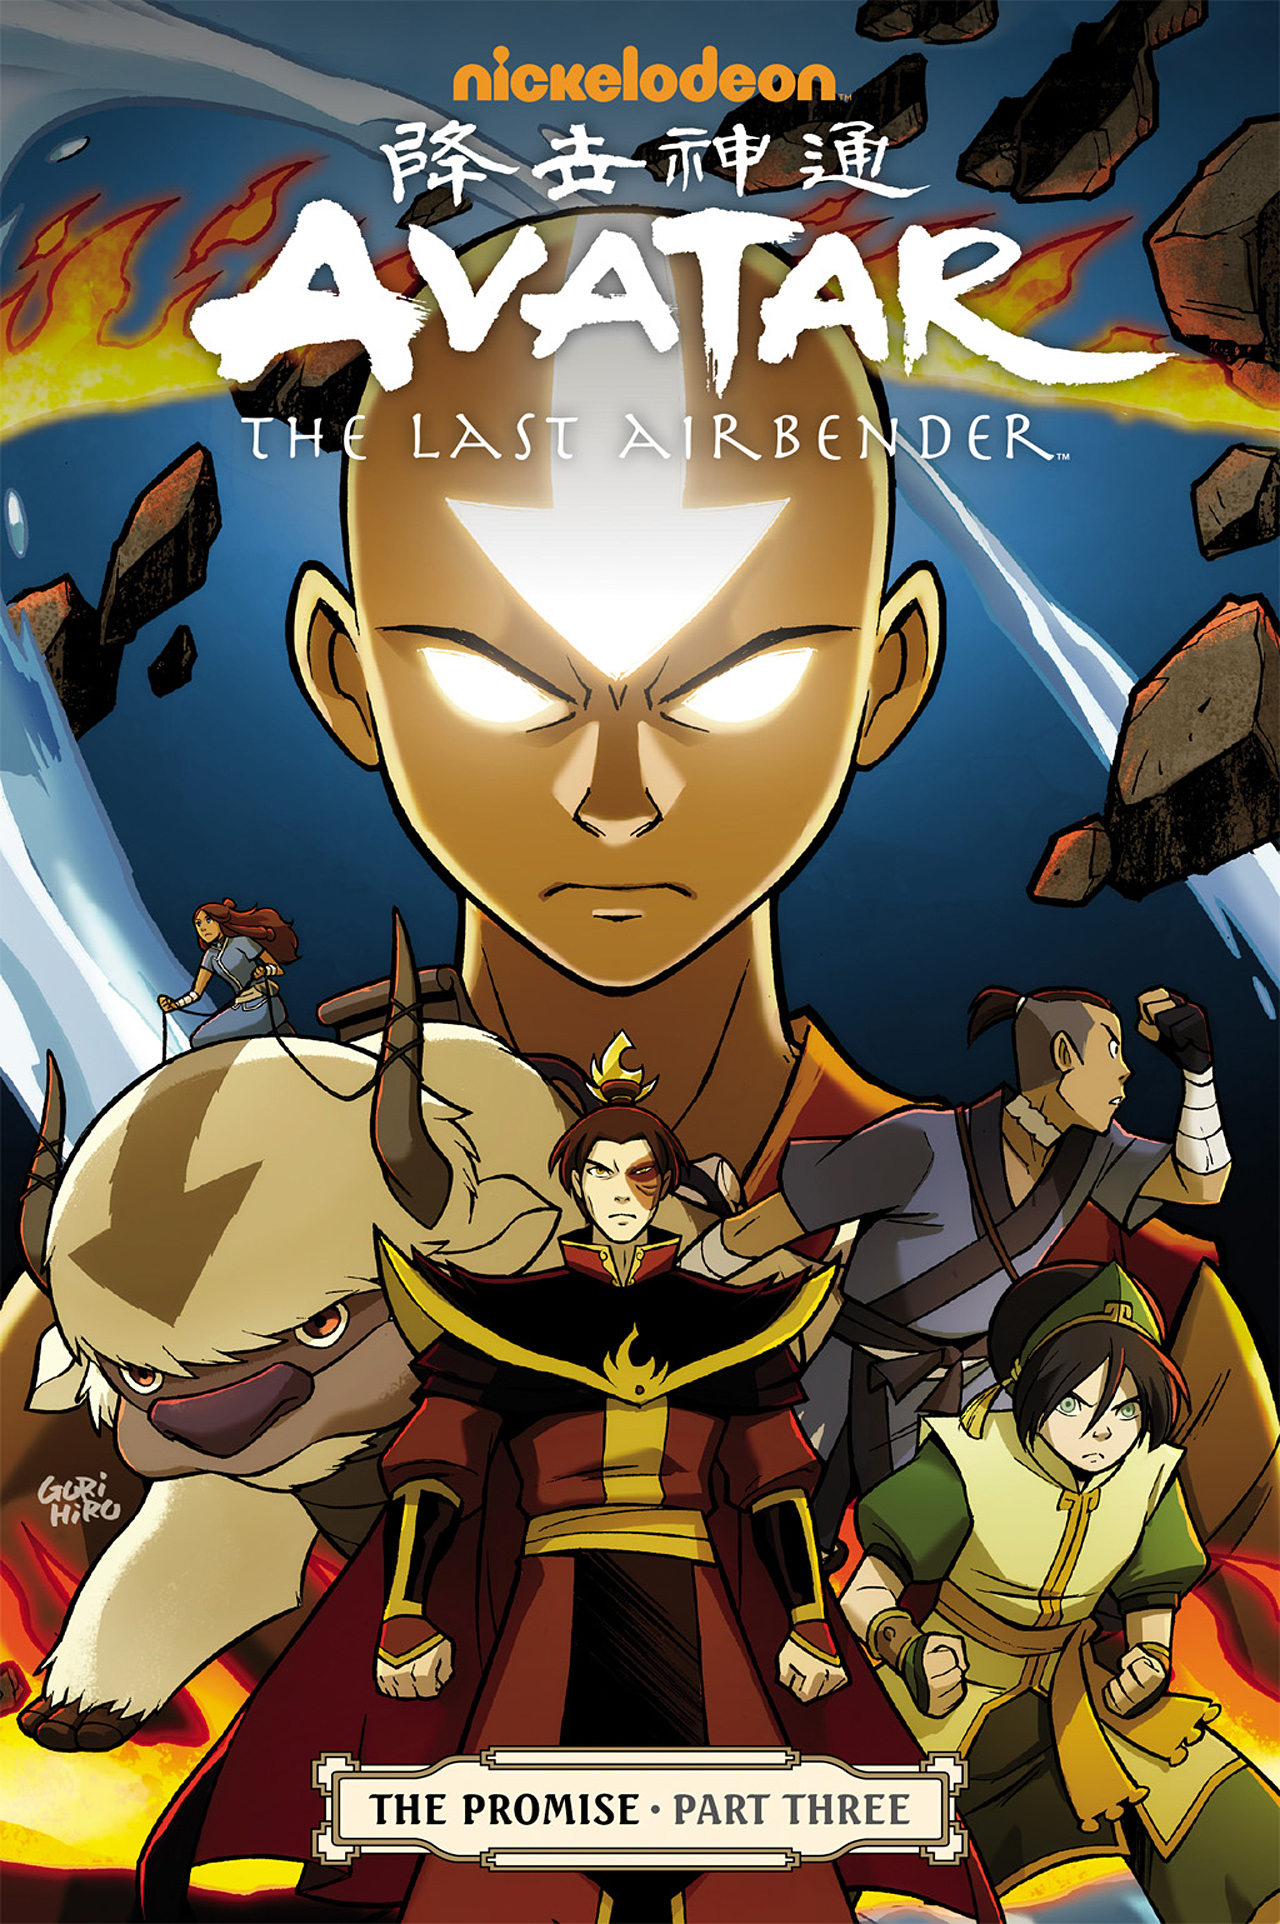 Read online Nickelodeon Avatar: The Last Airbender - The Promise comic -  Issue # Part 3 - 1